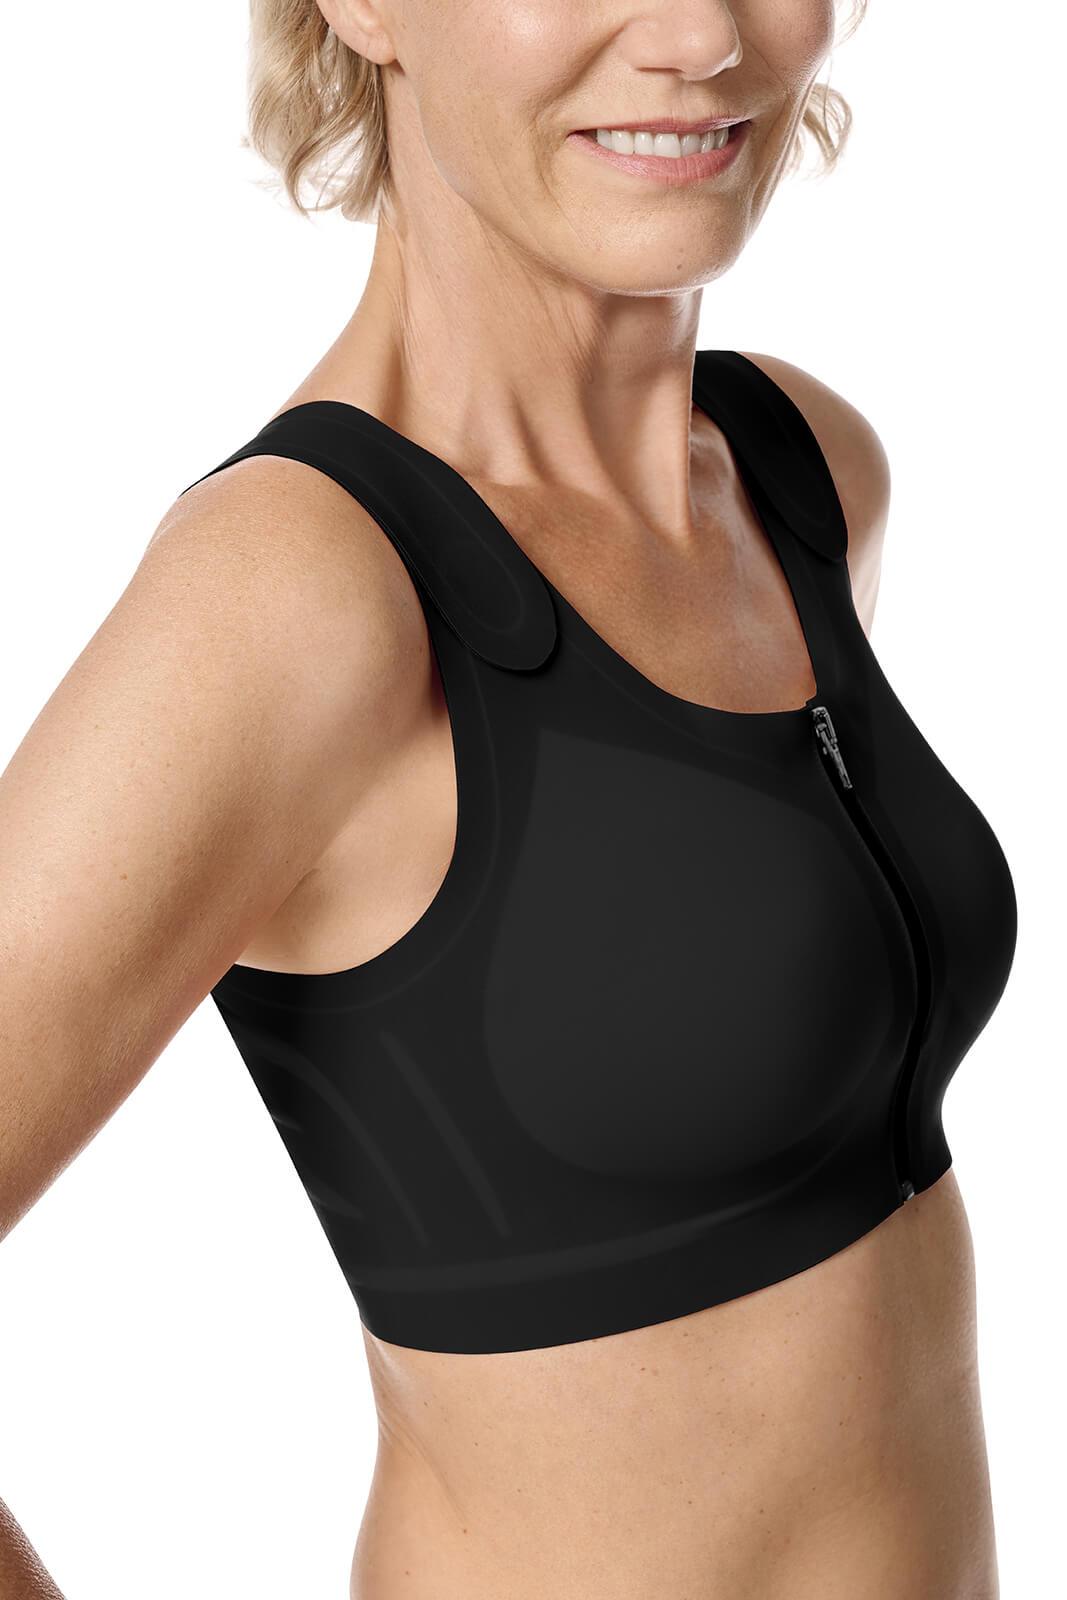  Amoena Lymph Flow Long Wire Free Front Closure Compression Bra  - Black - Small - Supports/Stimulates Lymp Flow: Clothing, Shoes & Jewelry